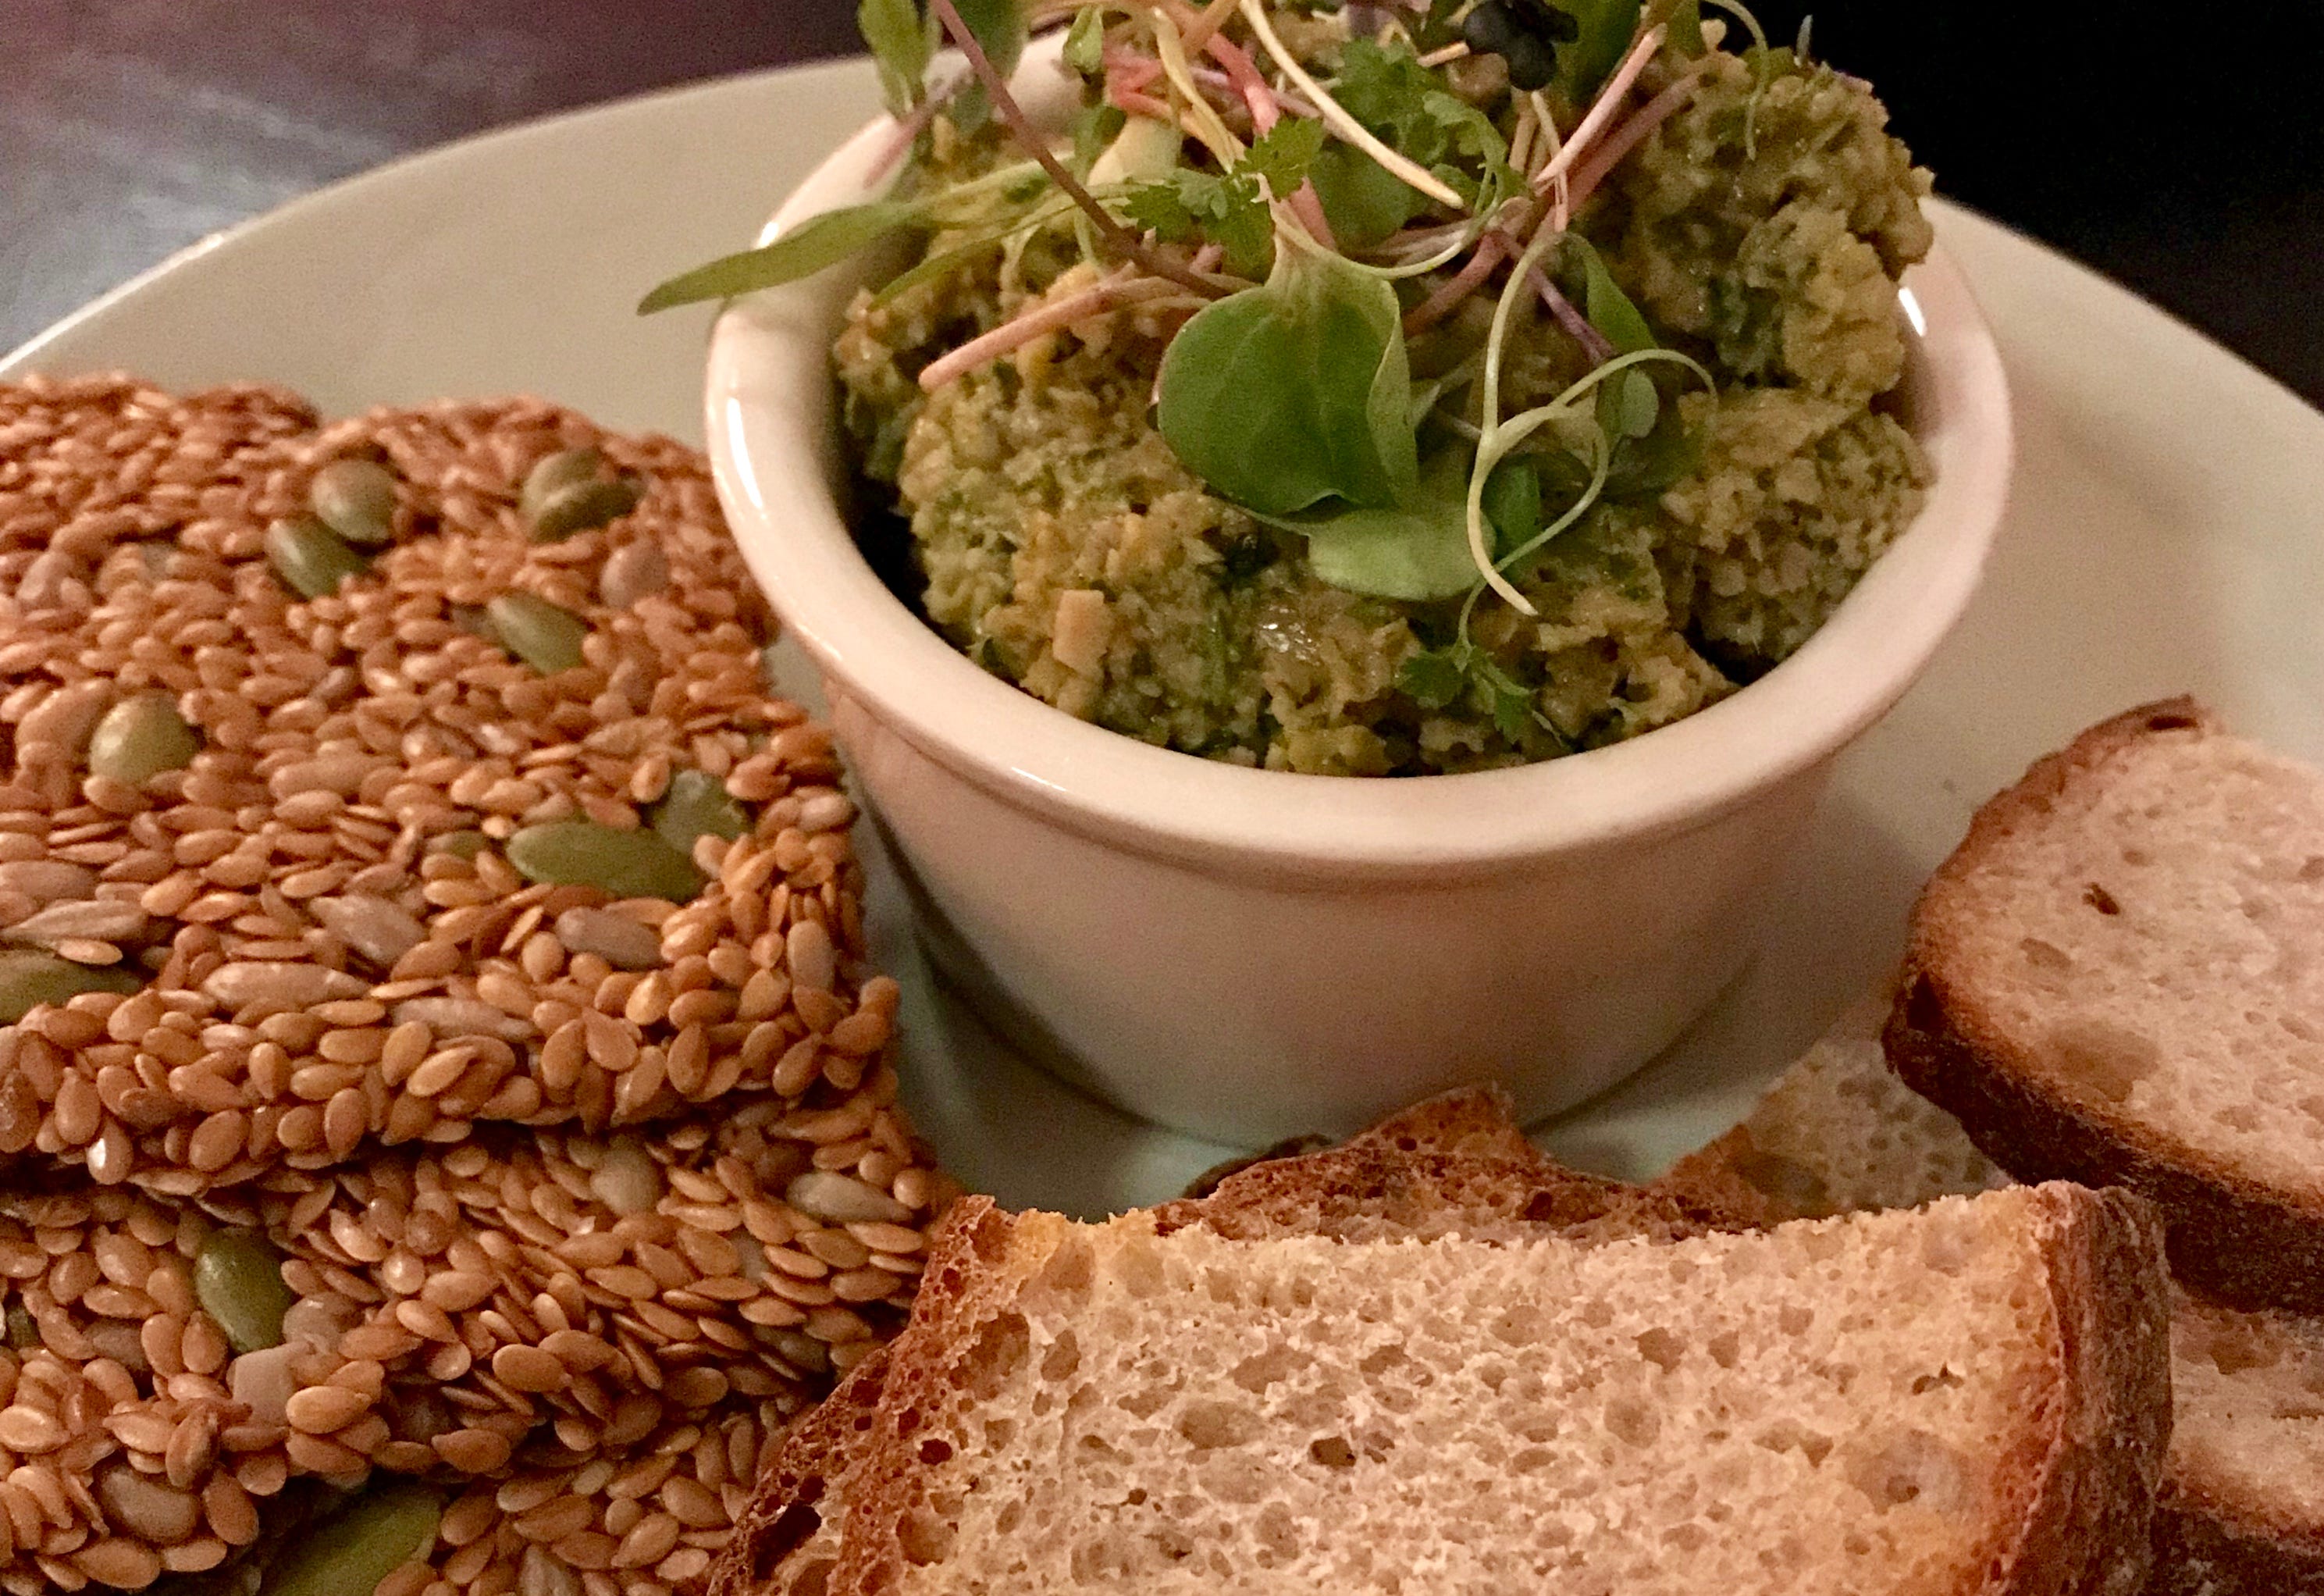 Olive tapenade with seed crackers and crusty bread is an example of the shareable plates on the changing, vegan menu at Strange Town, 2101 N. Prospect Ave.